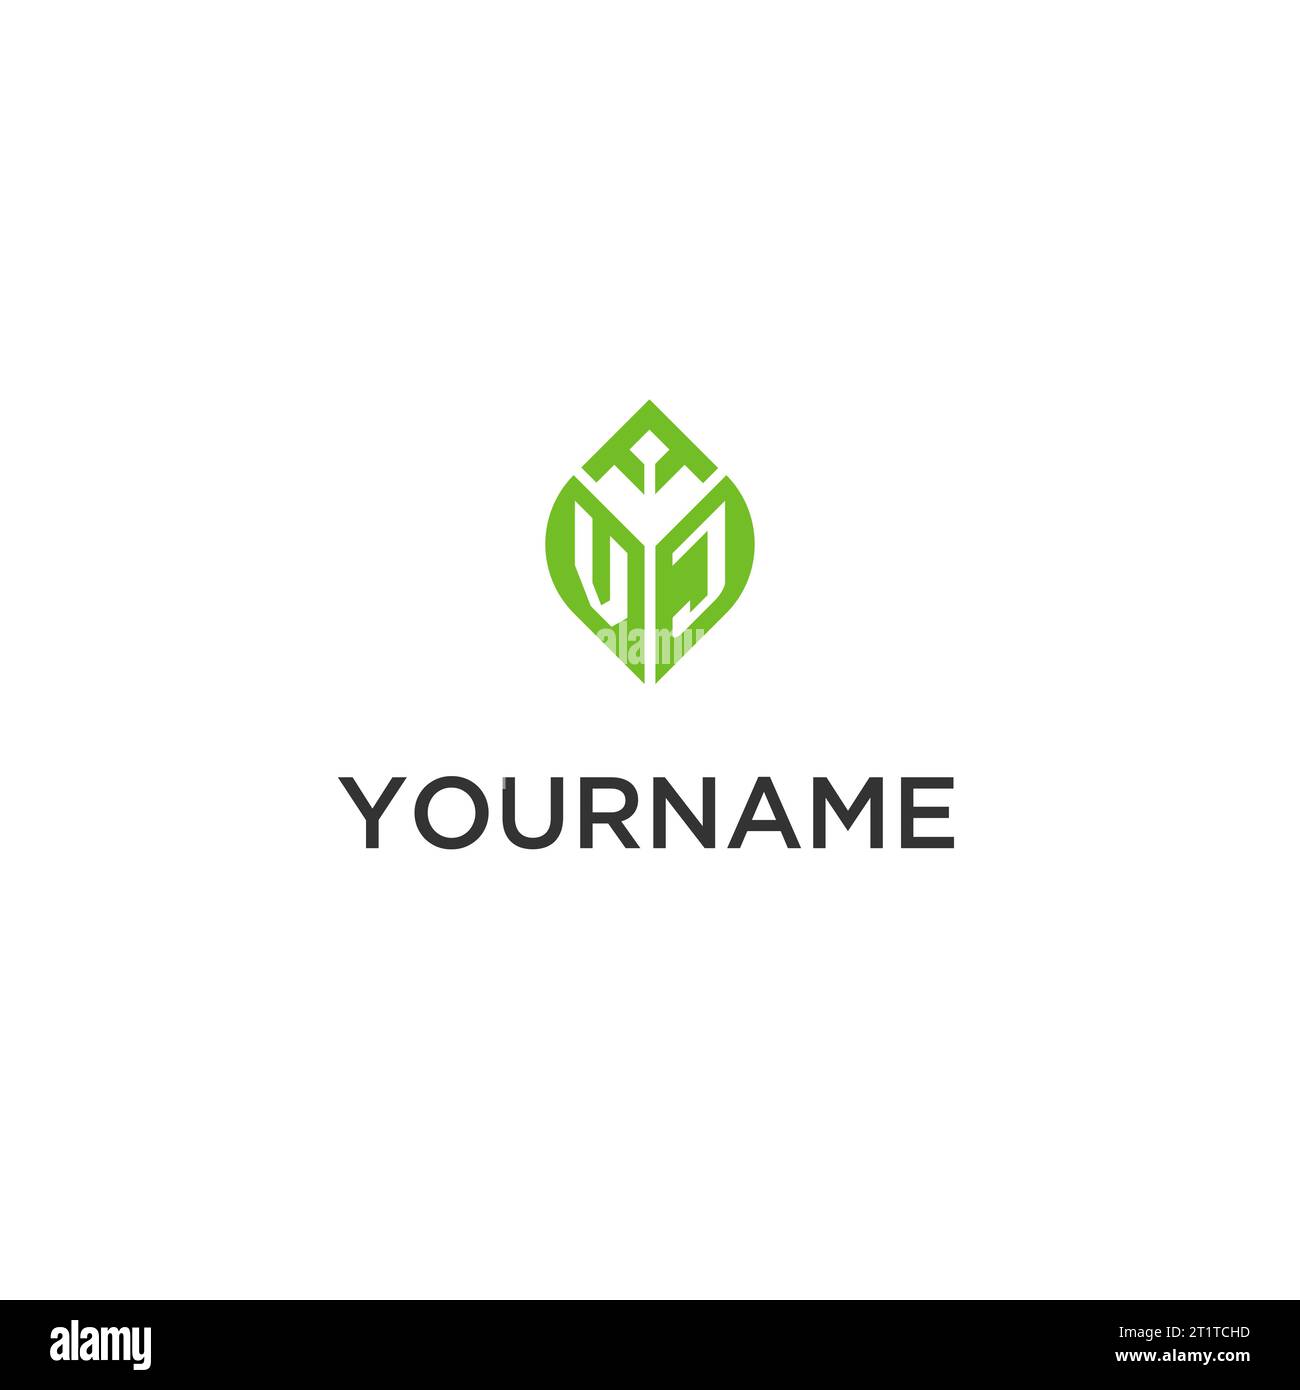 VJ monogram with leaf logo design ideas, creative initial letter logo with natural green leaves vector graphic Stock Vector